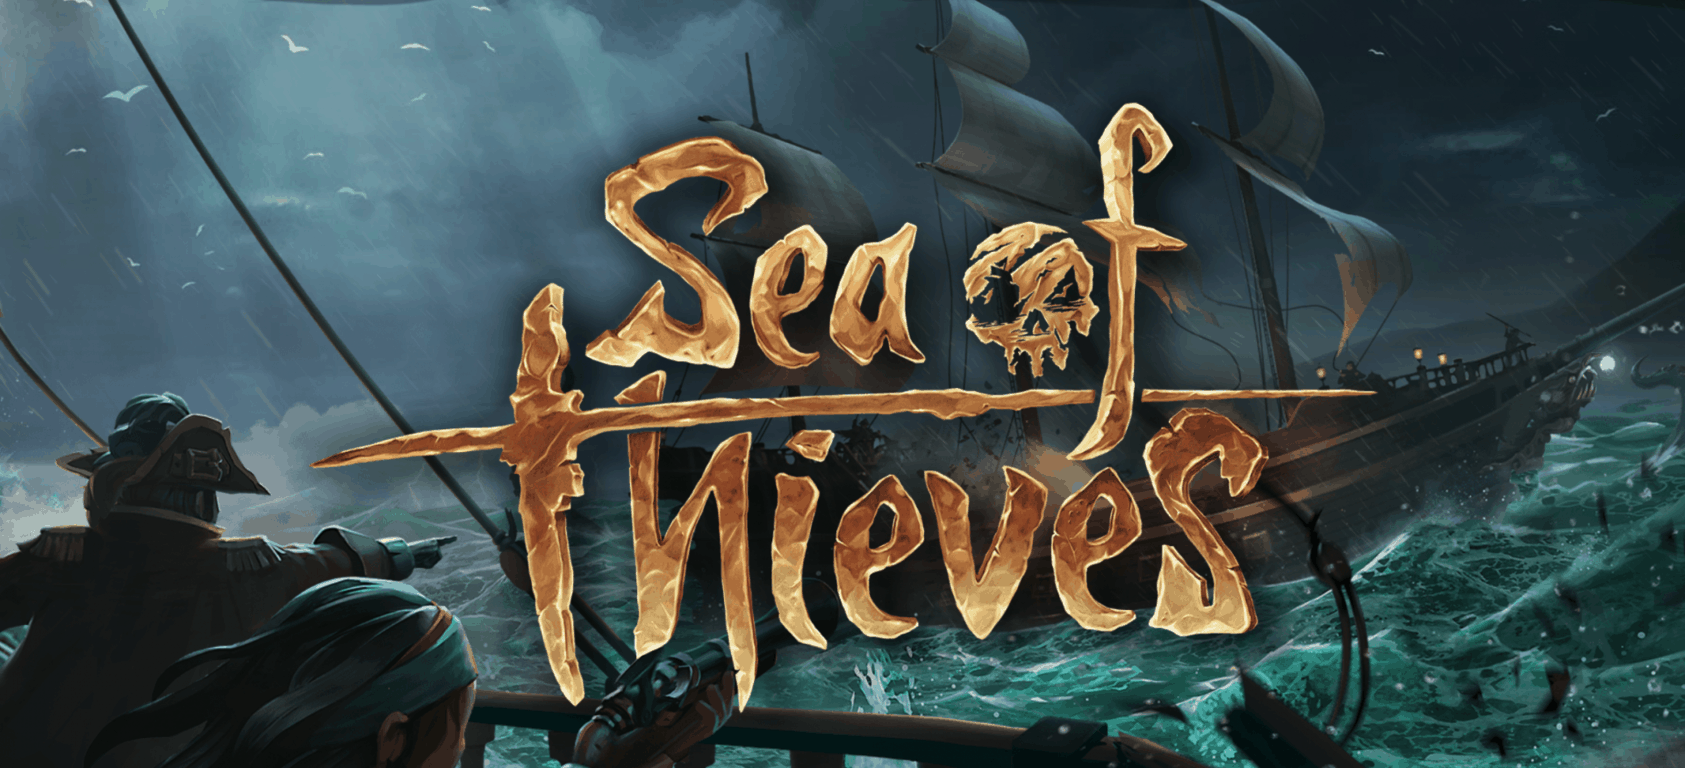 Sea of Thieves gets mouse, keyboard and Xbox chatpad support on Xbox One today - OnMSFT.com - March 20, 2019